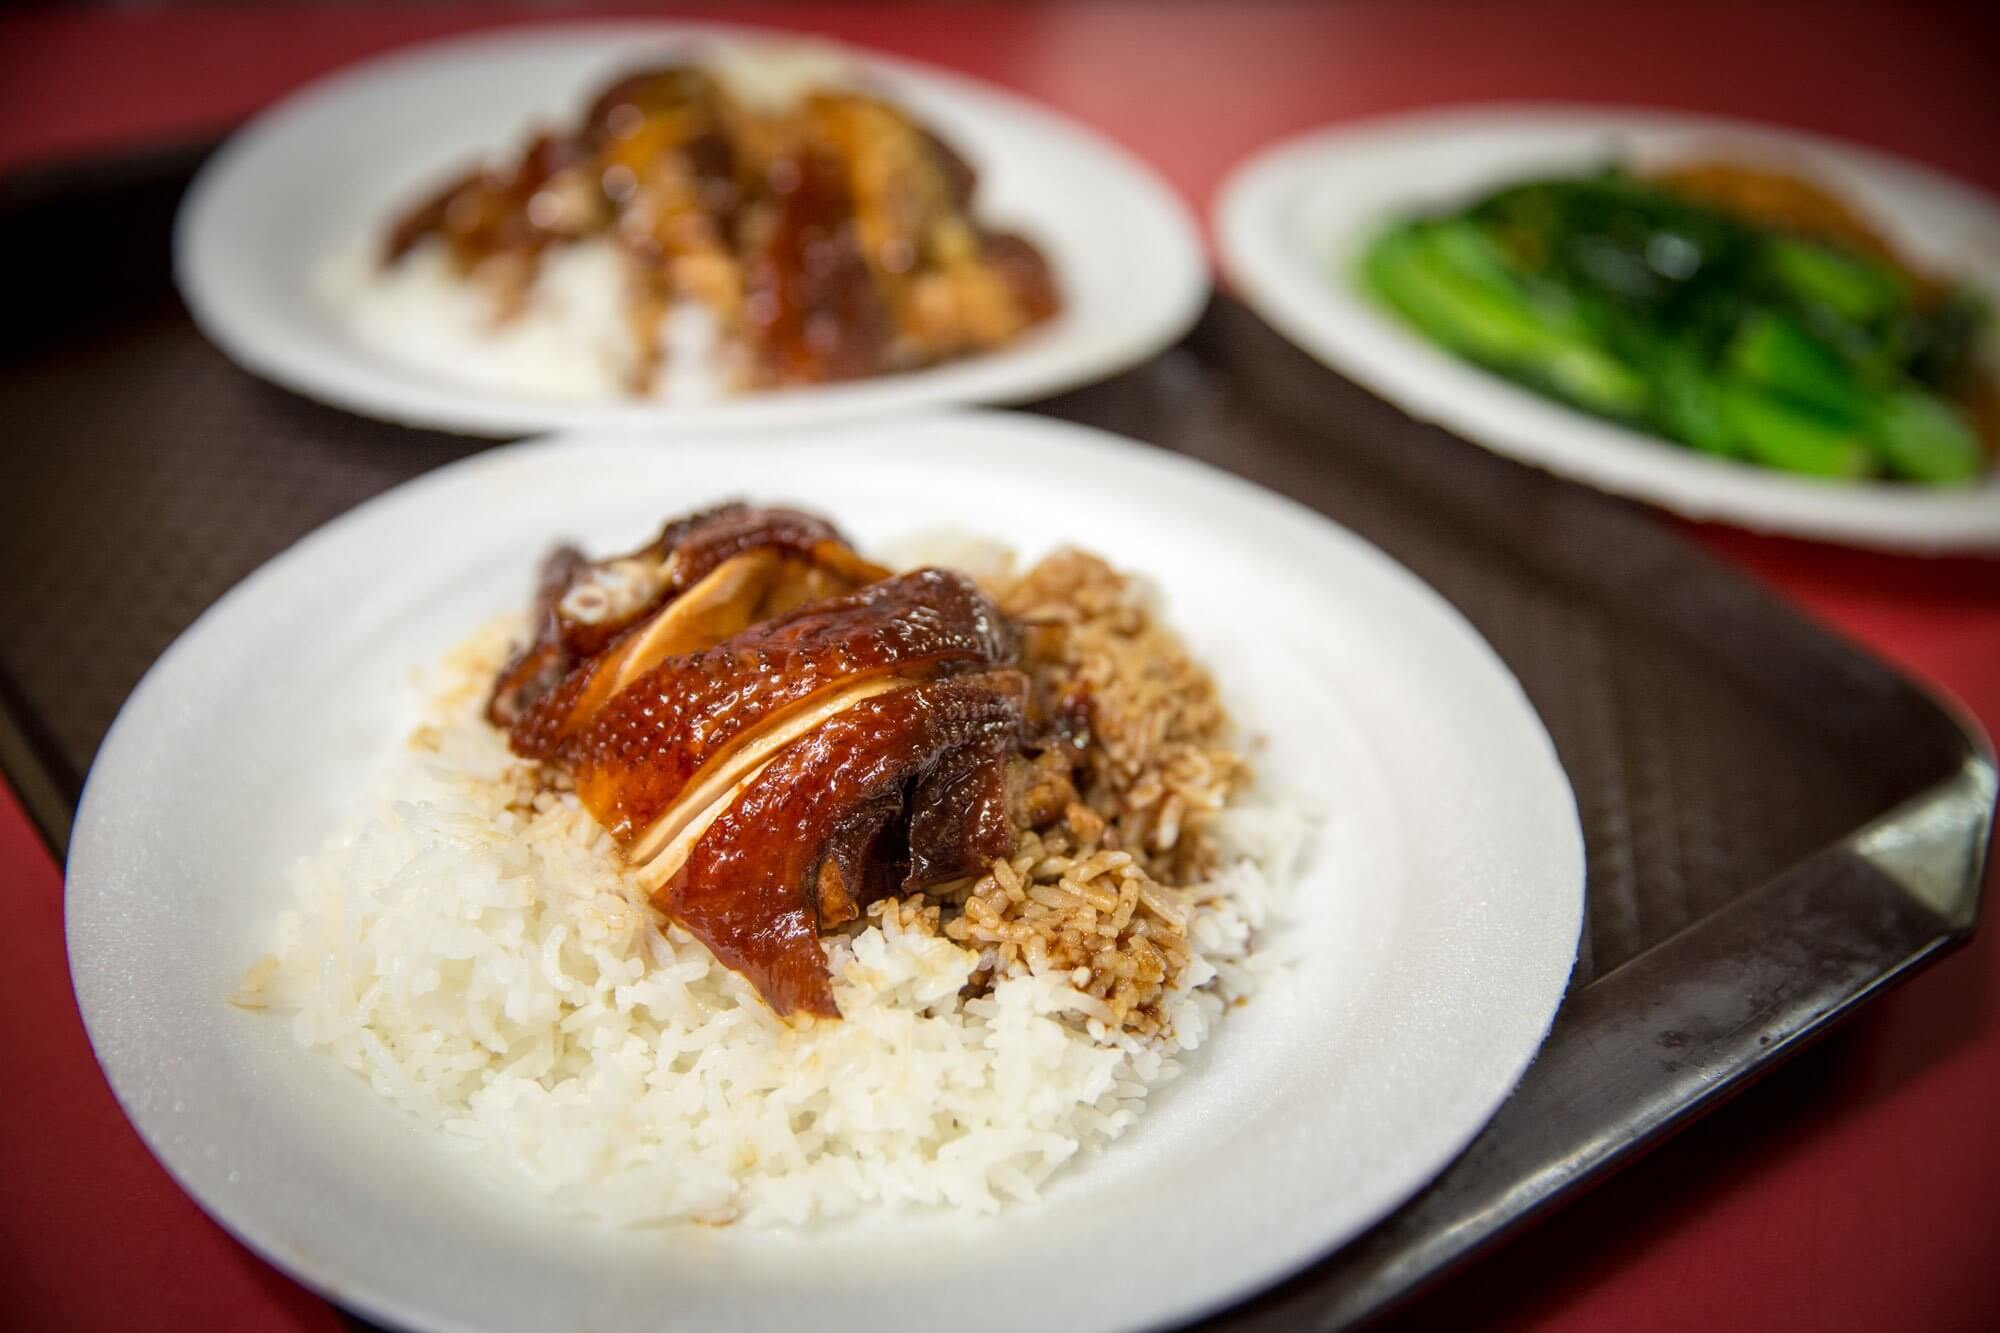 Michelin star Hong Kong soy sauce chicken rice at the Chinatown Complex Food Center